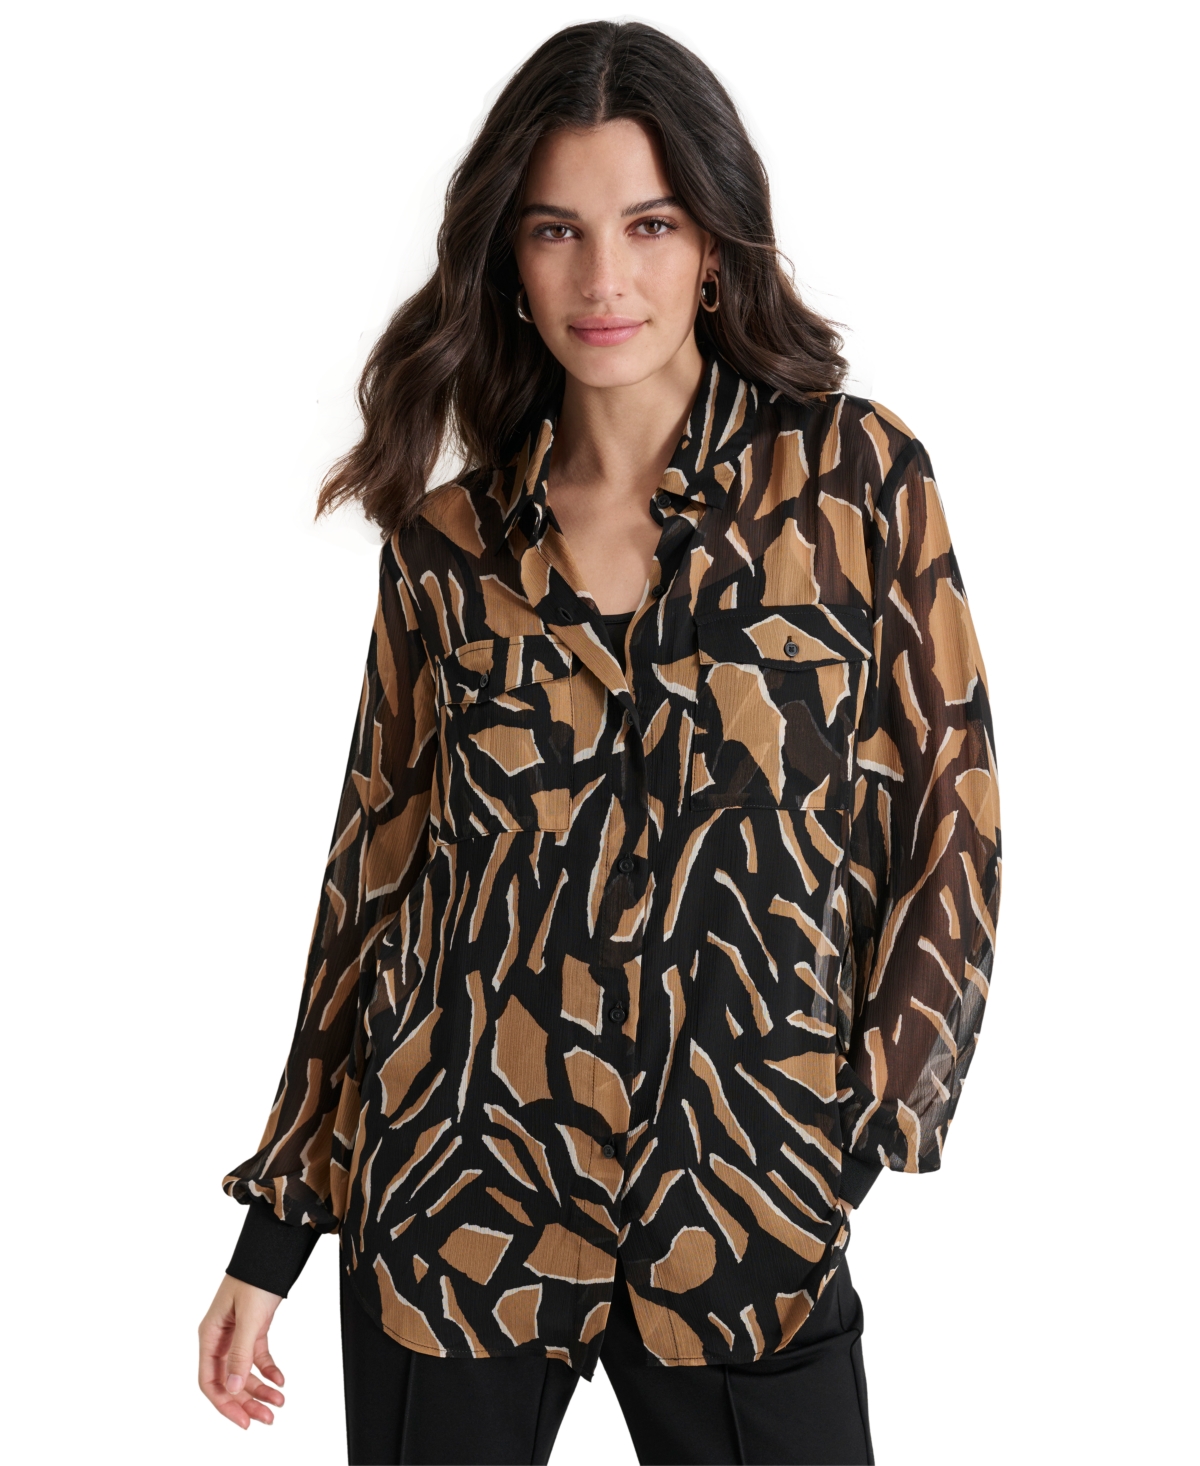 Women's Printed Button-Front Long-Sleeve Shirt - Abstract Geo